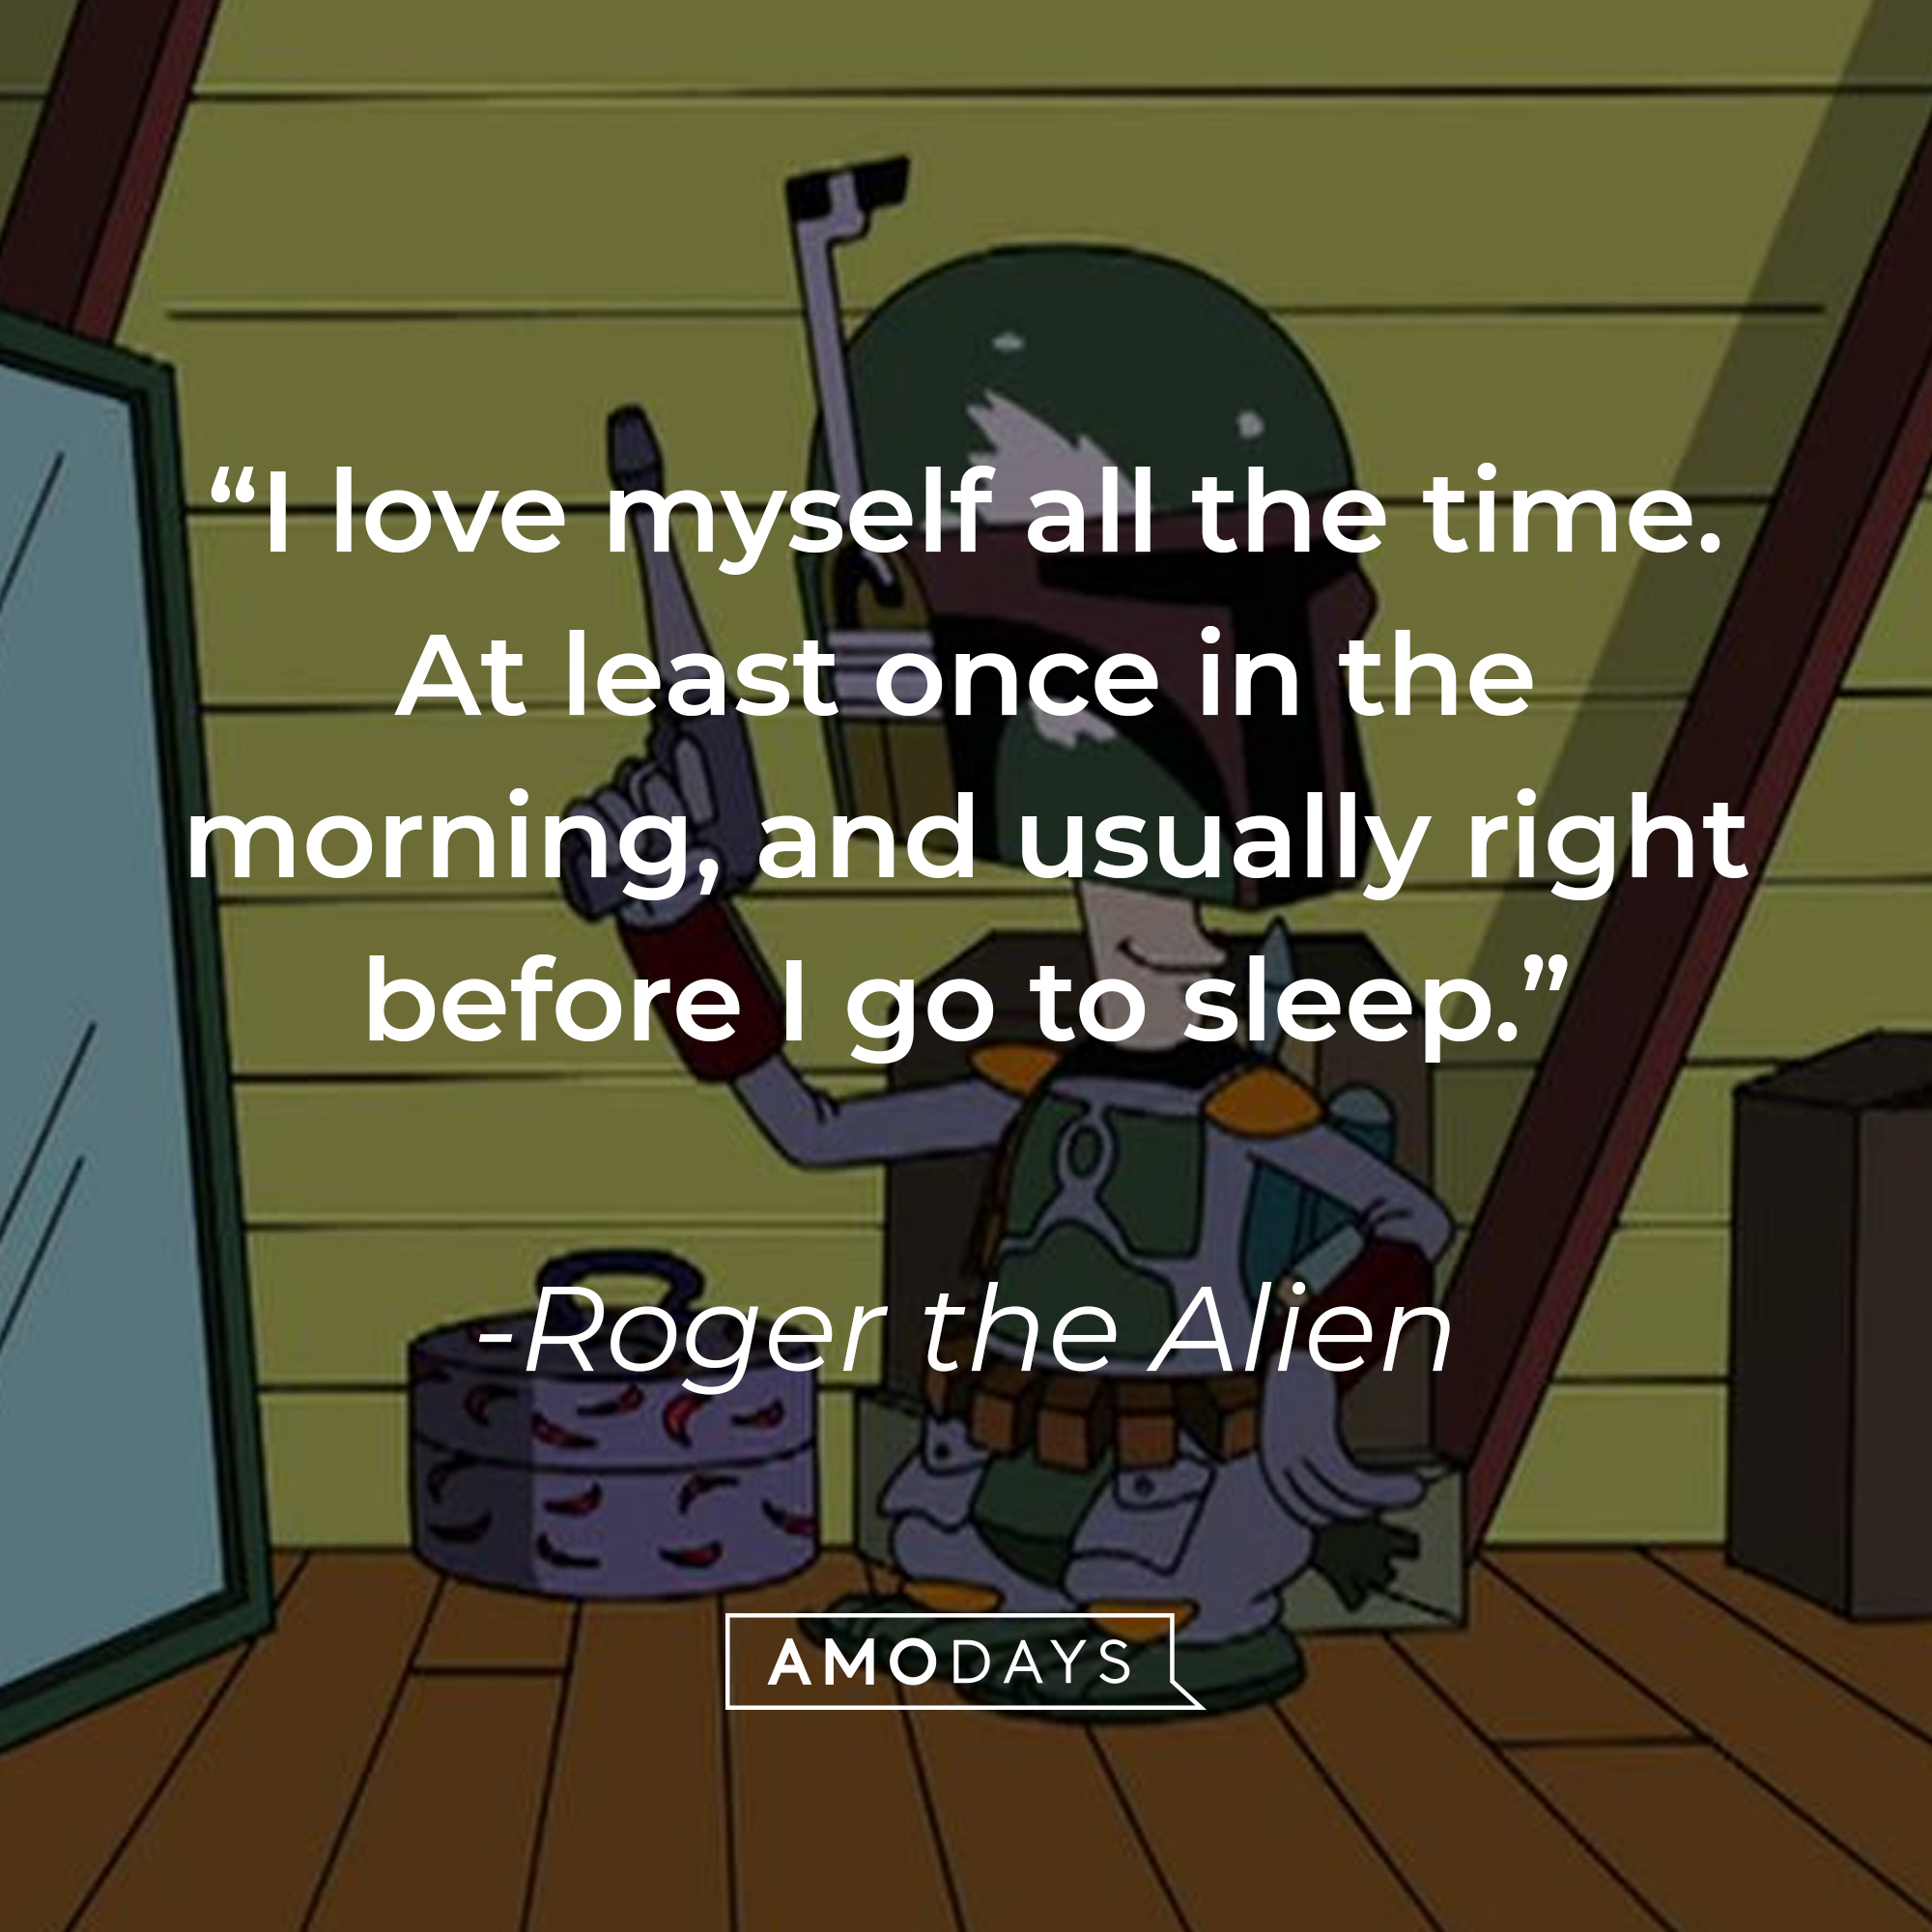 Roger the Alien’s quote: “I love myself all the time. At least once in the morning, and usually right before I go to sleep.” | Source: facebook.com/AmericanDad